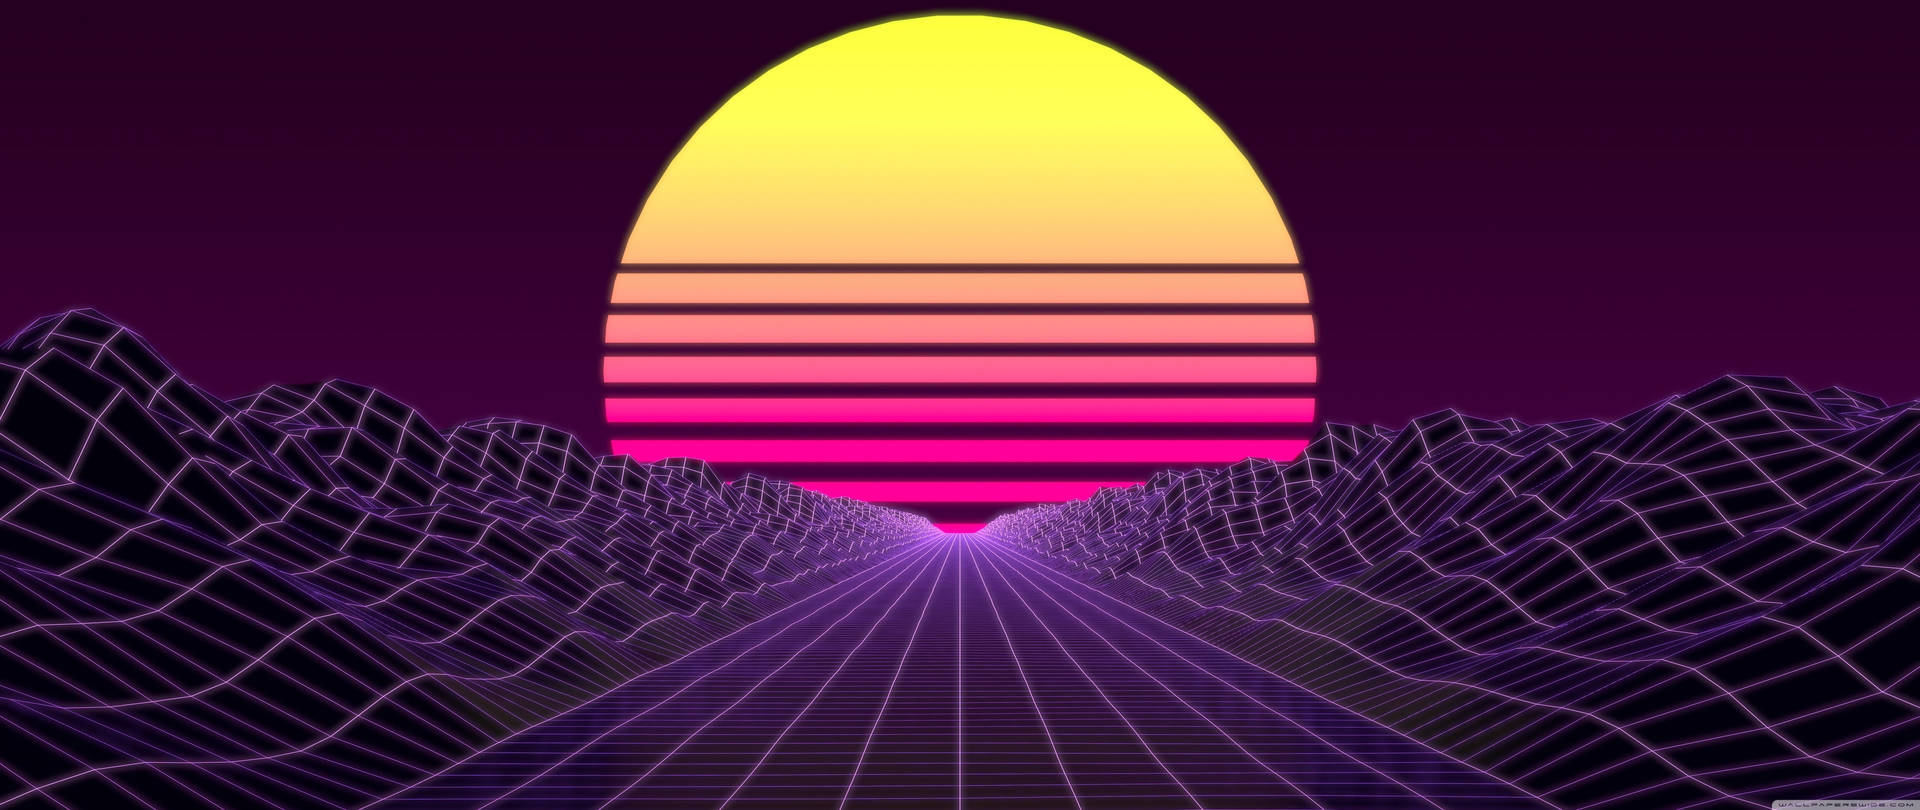 Synthwave Sun On Valley Wallpaper